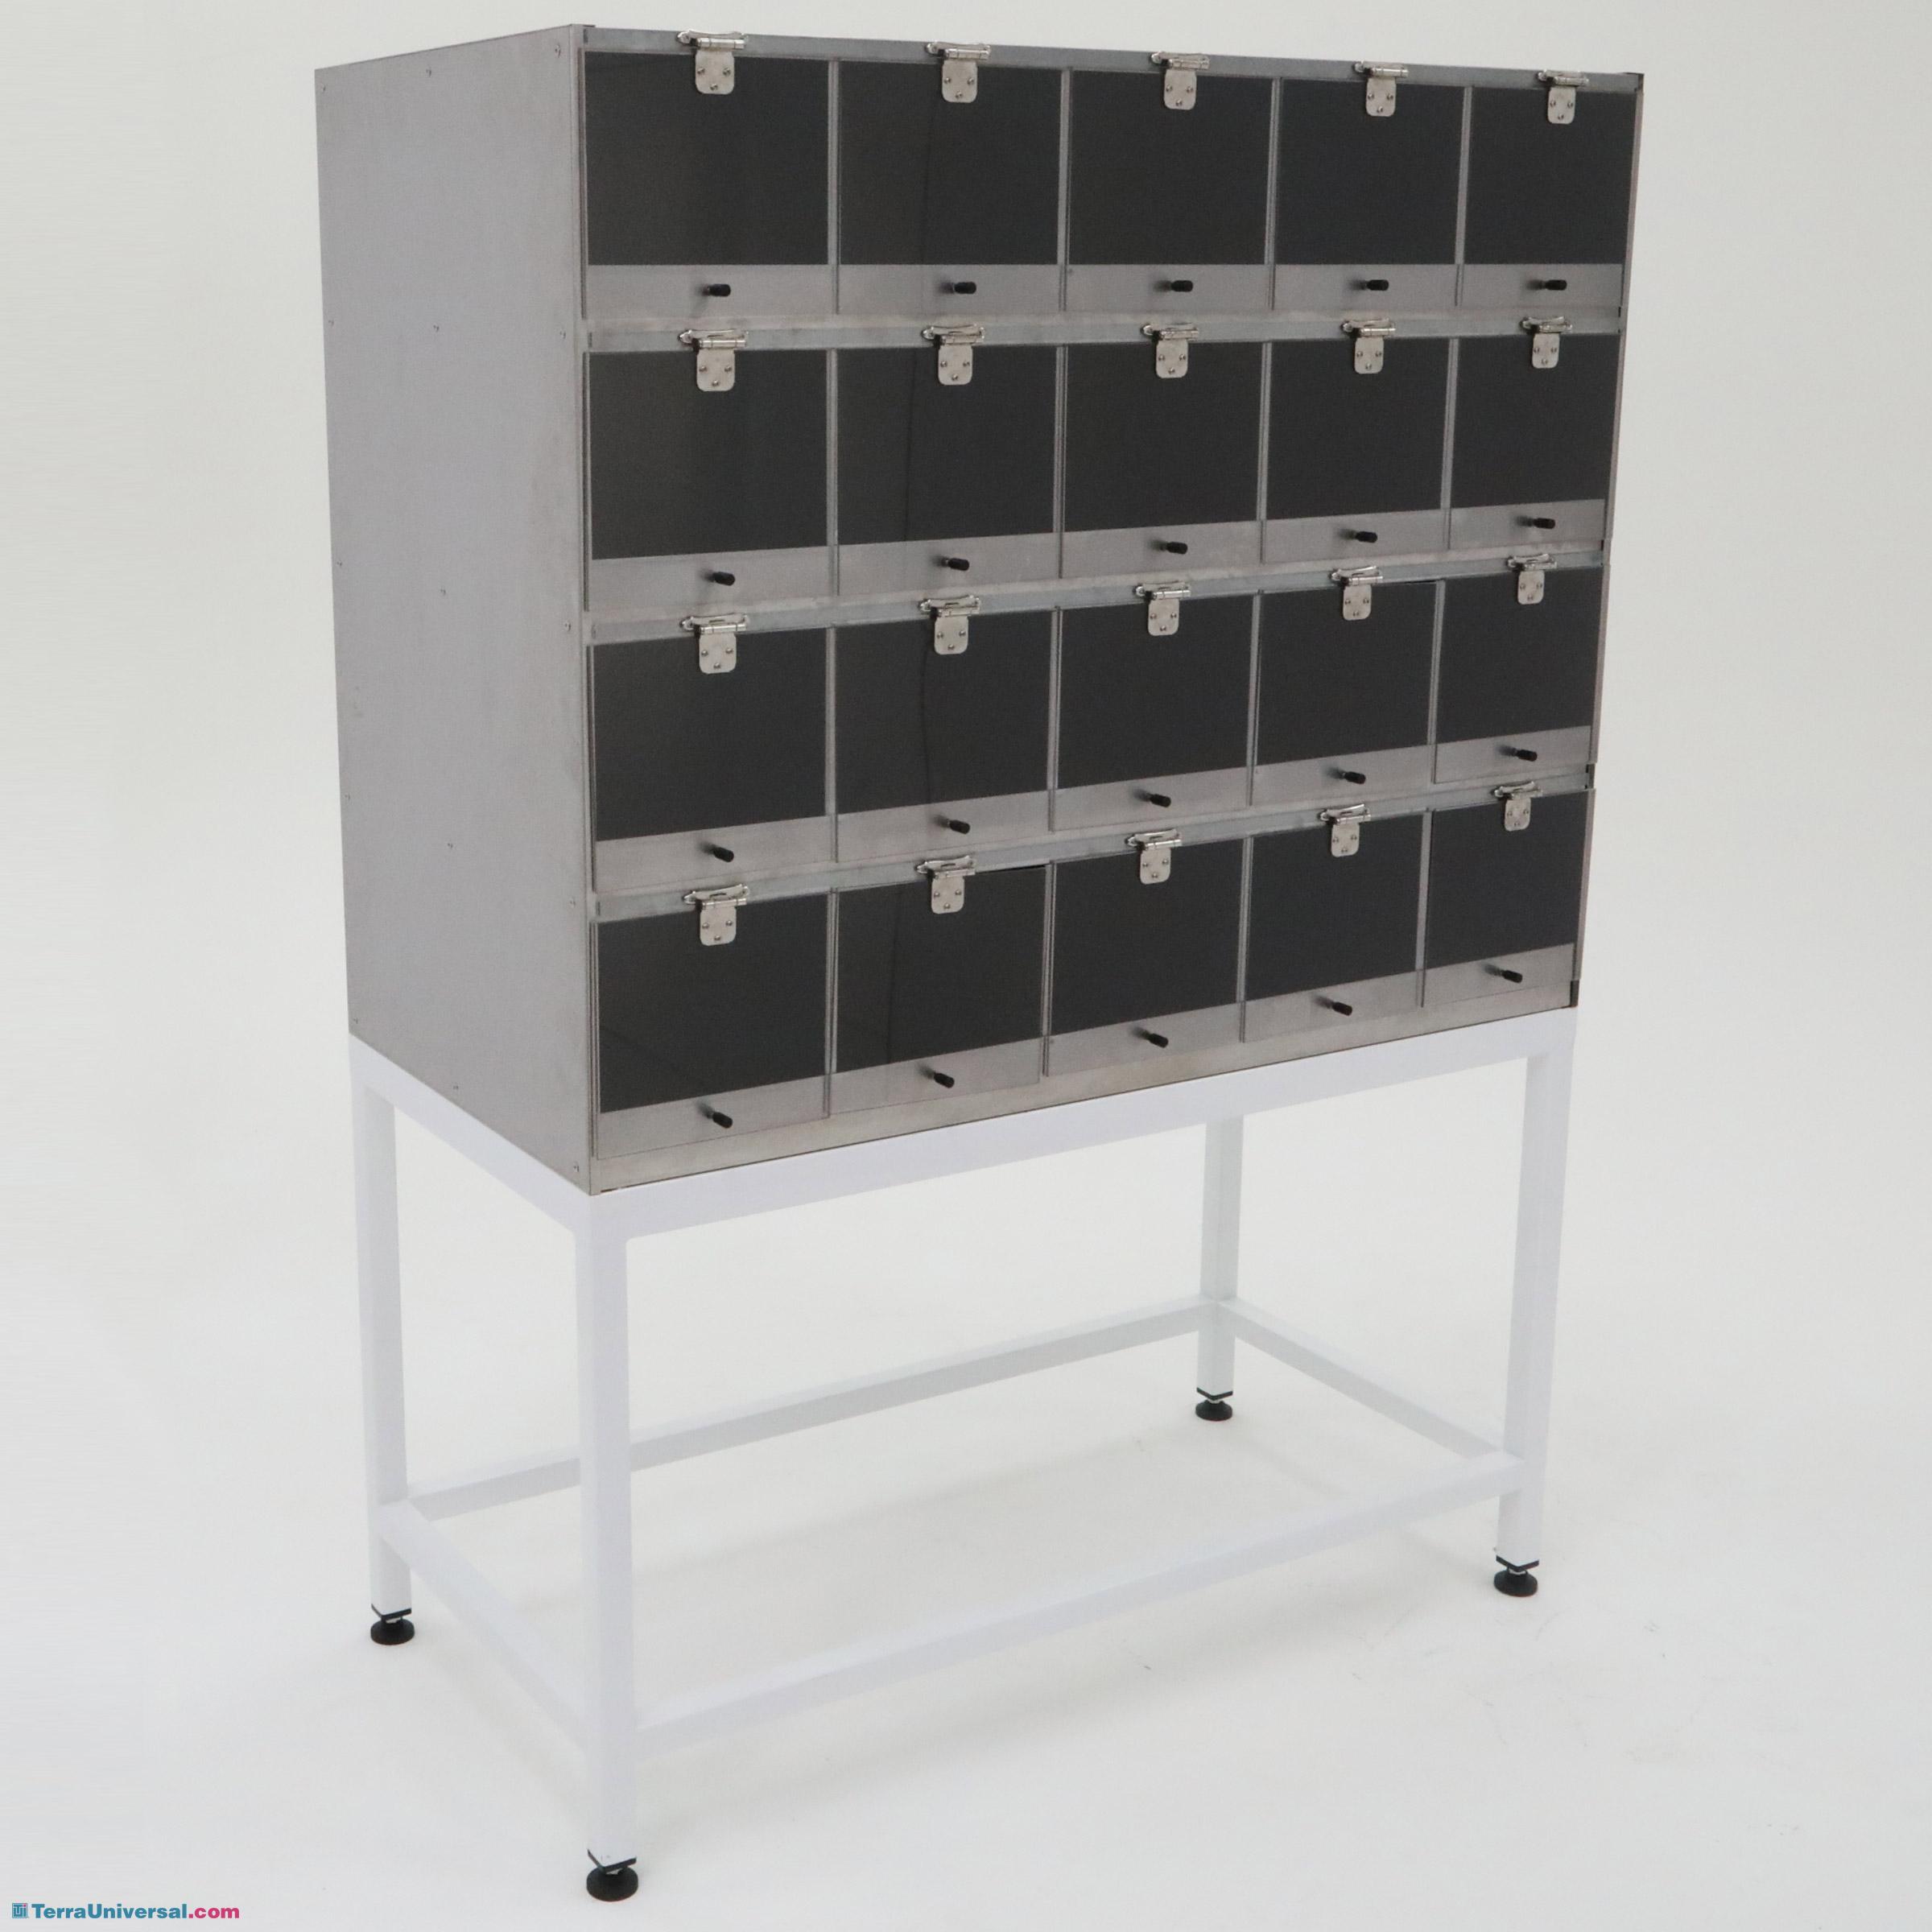 Stocking, Kitting and Dispensing Cabinets